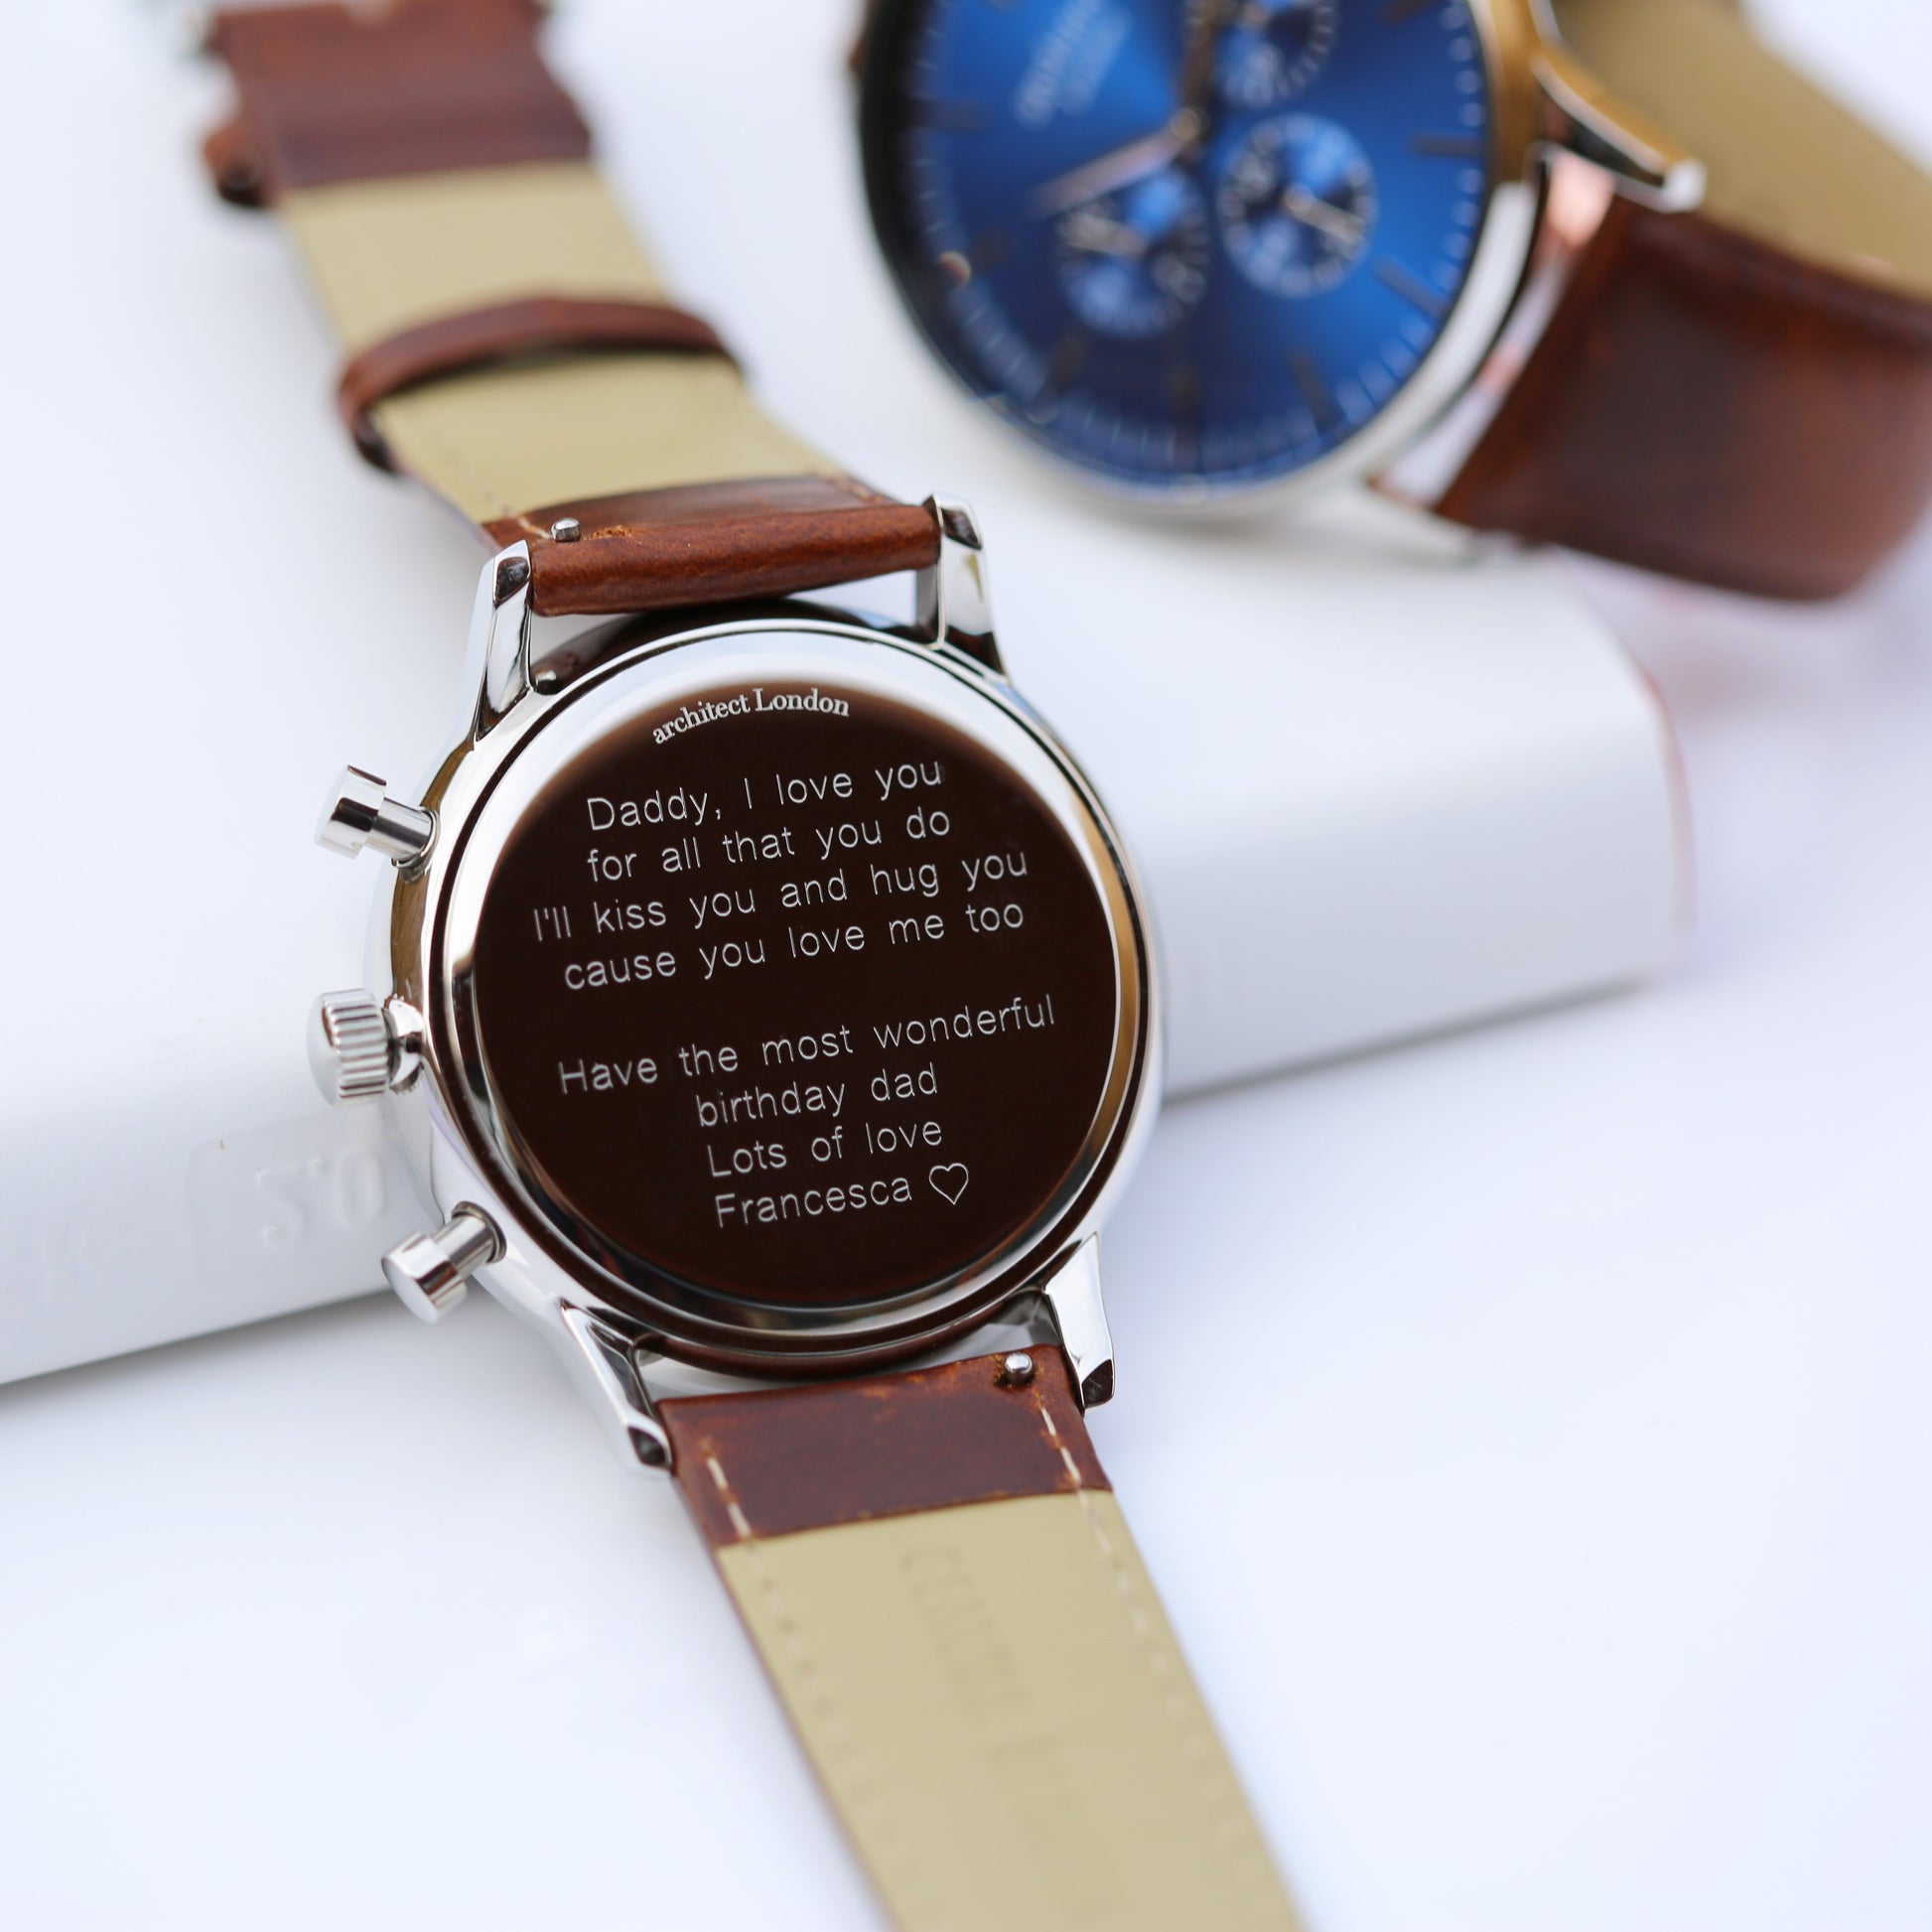 Personalized Men's Watches - Modern Font Engraving - Men's Architect Motivator With Walnut 